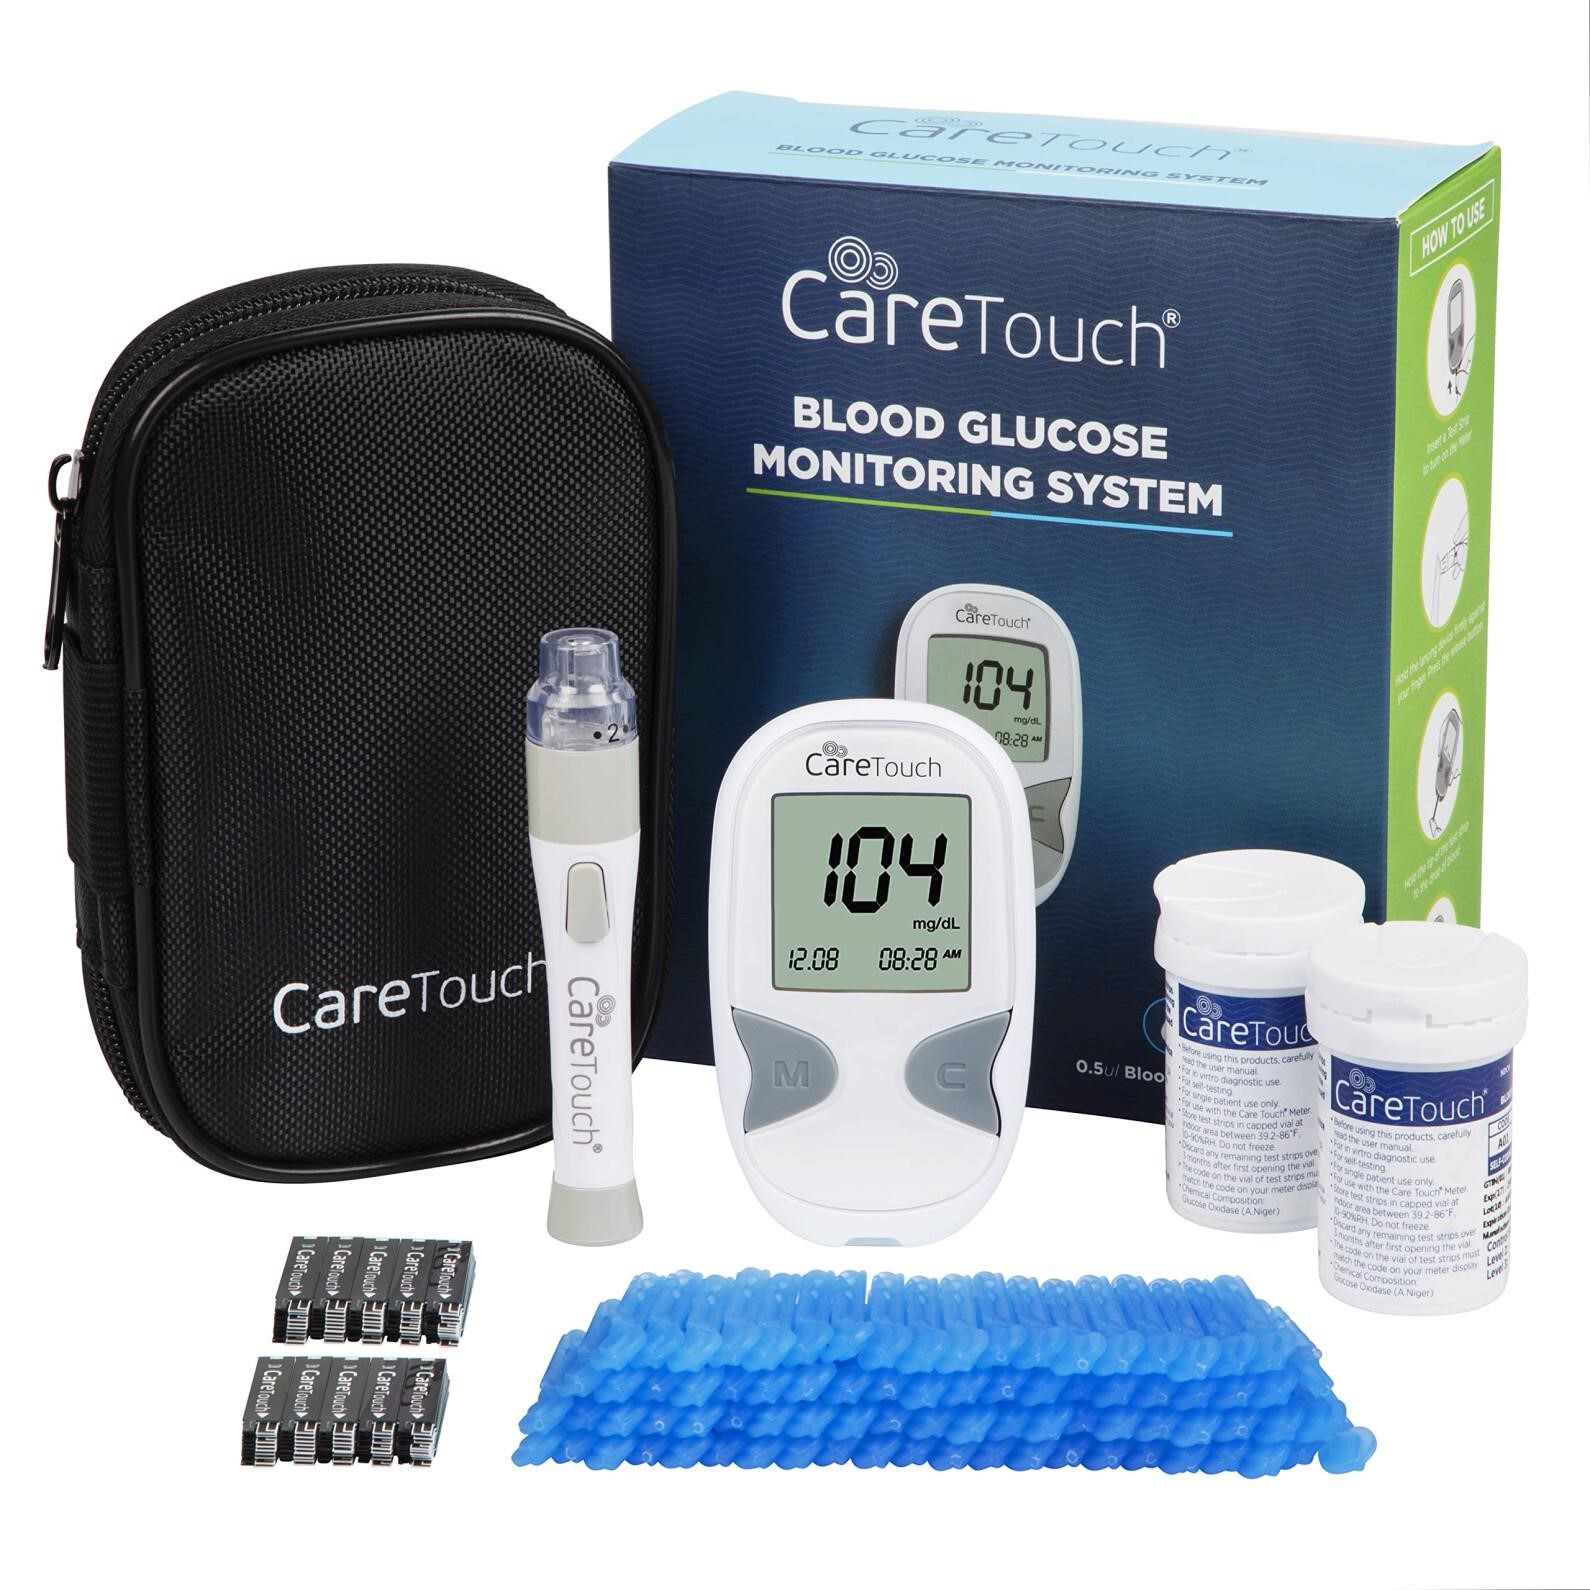 Care Touch Blood Glucose Meter Kit - Diabetes Test